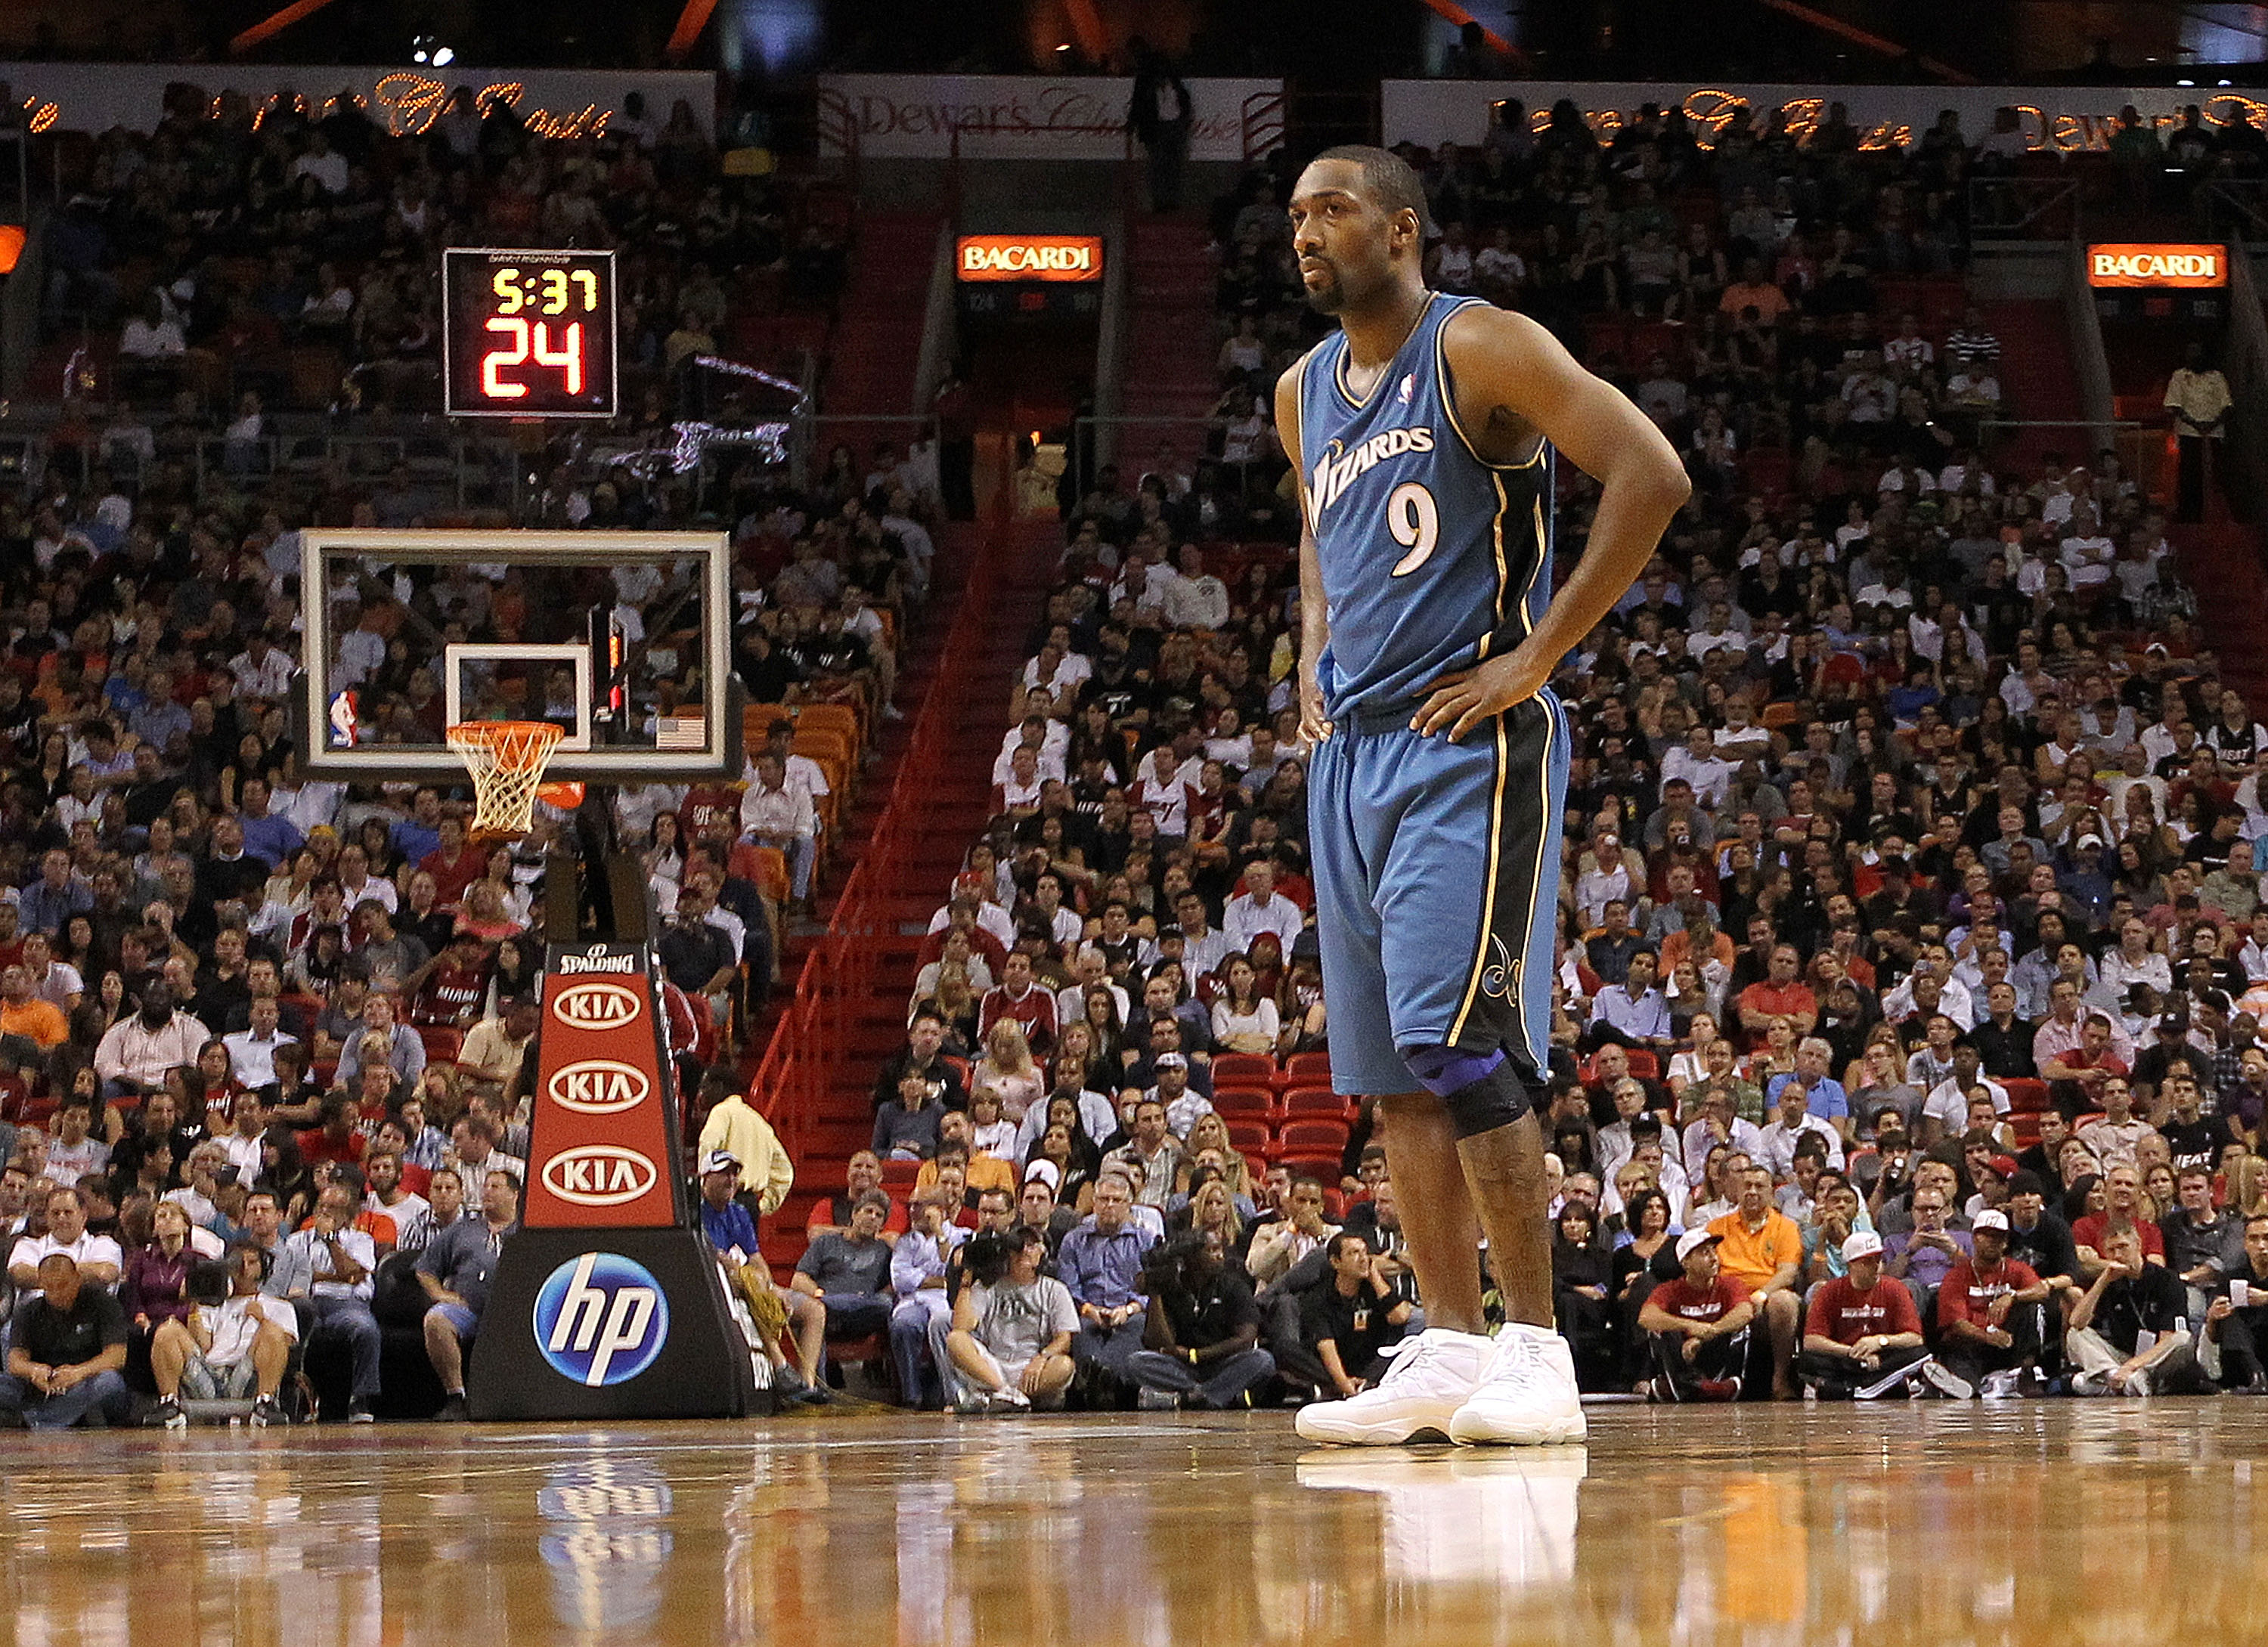 MIAMI, FL - NOVEMBER 29:  Gilbert Arenas #9 of the Washington Wizards looks on during a game against the Miami Heat at American Airlines Arena on November 29, 2010 in Miami, Florida. NOTE TO USER: User expressly acknowledges and agrees that, by downloadin